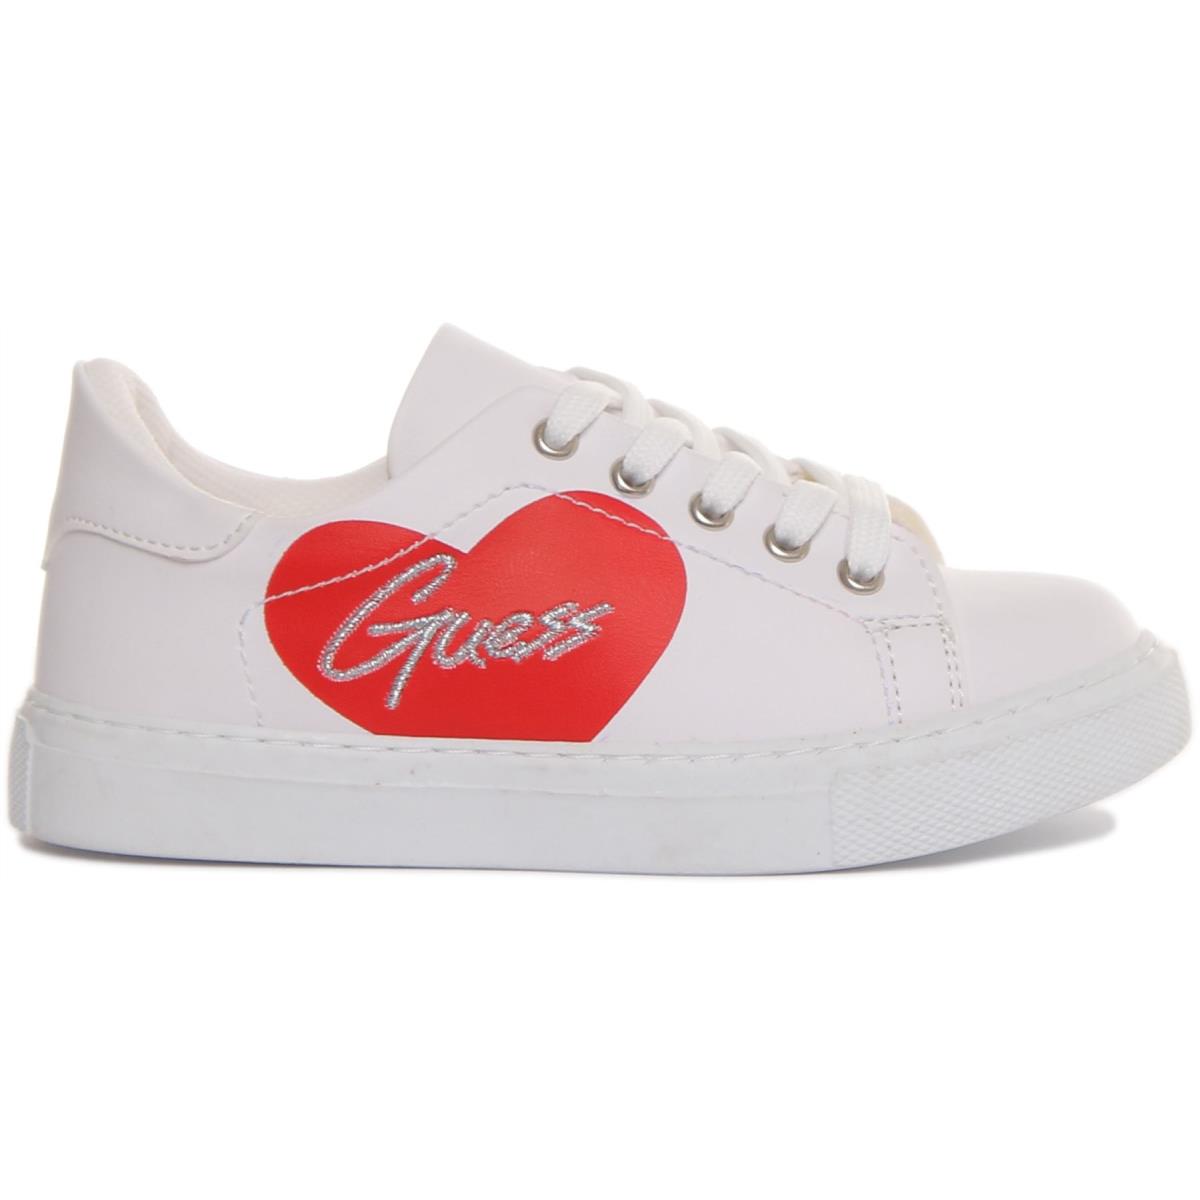 Guess Ellie Lace up Girls Kids Heart Print Trainer White Red Size US 8 - 2